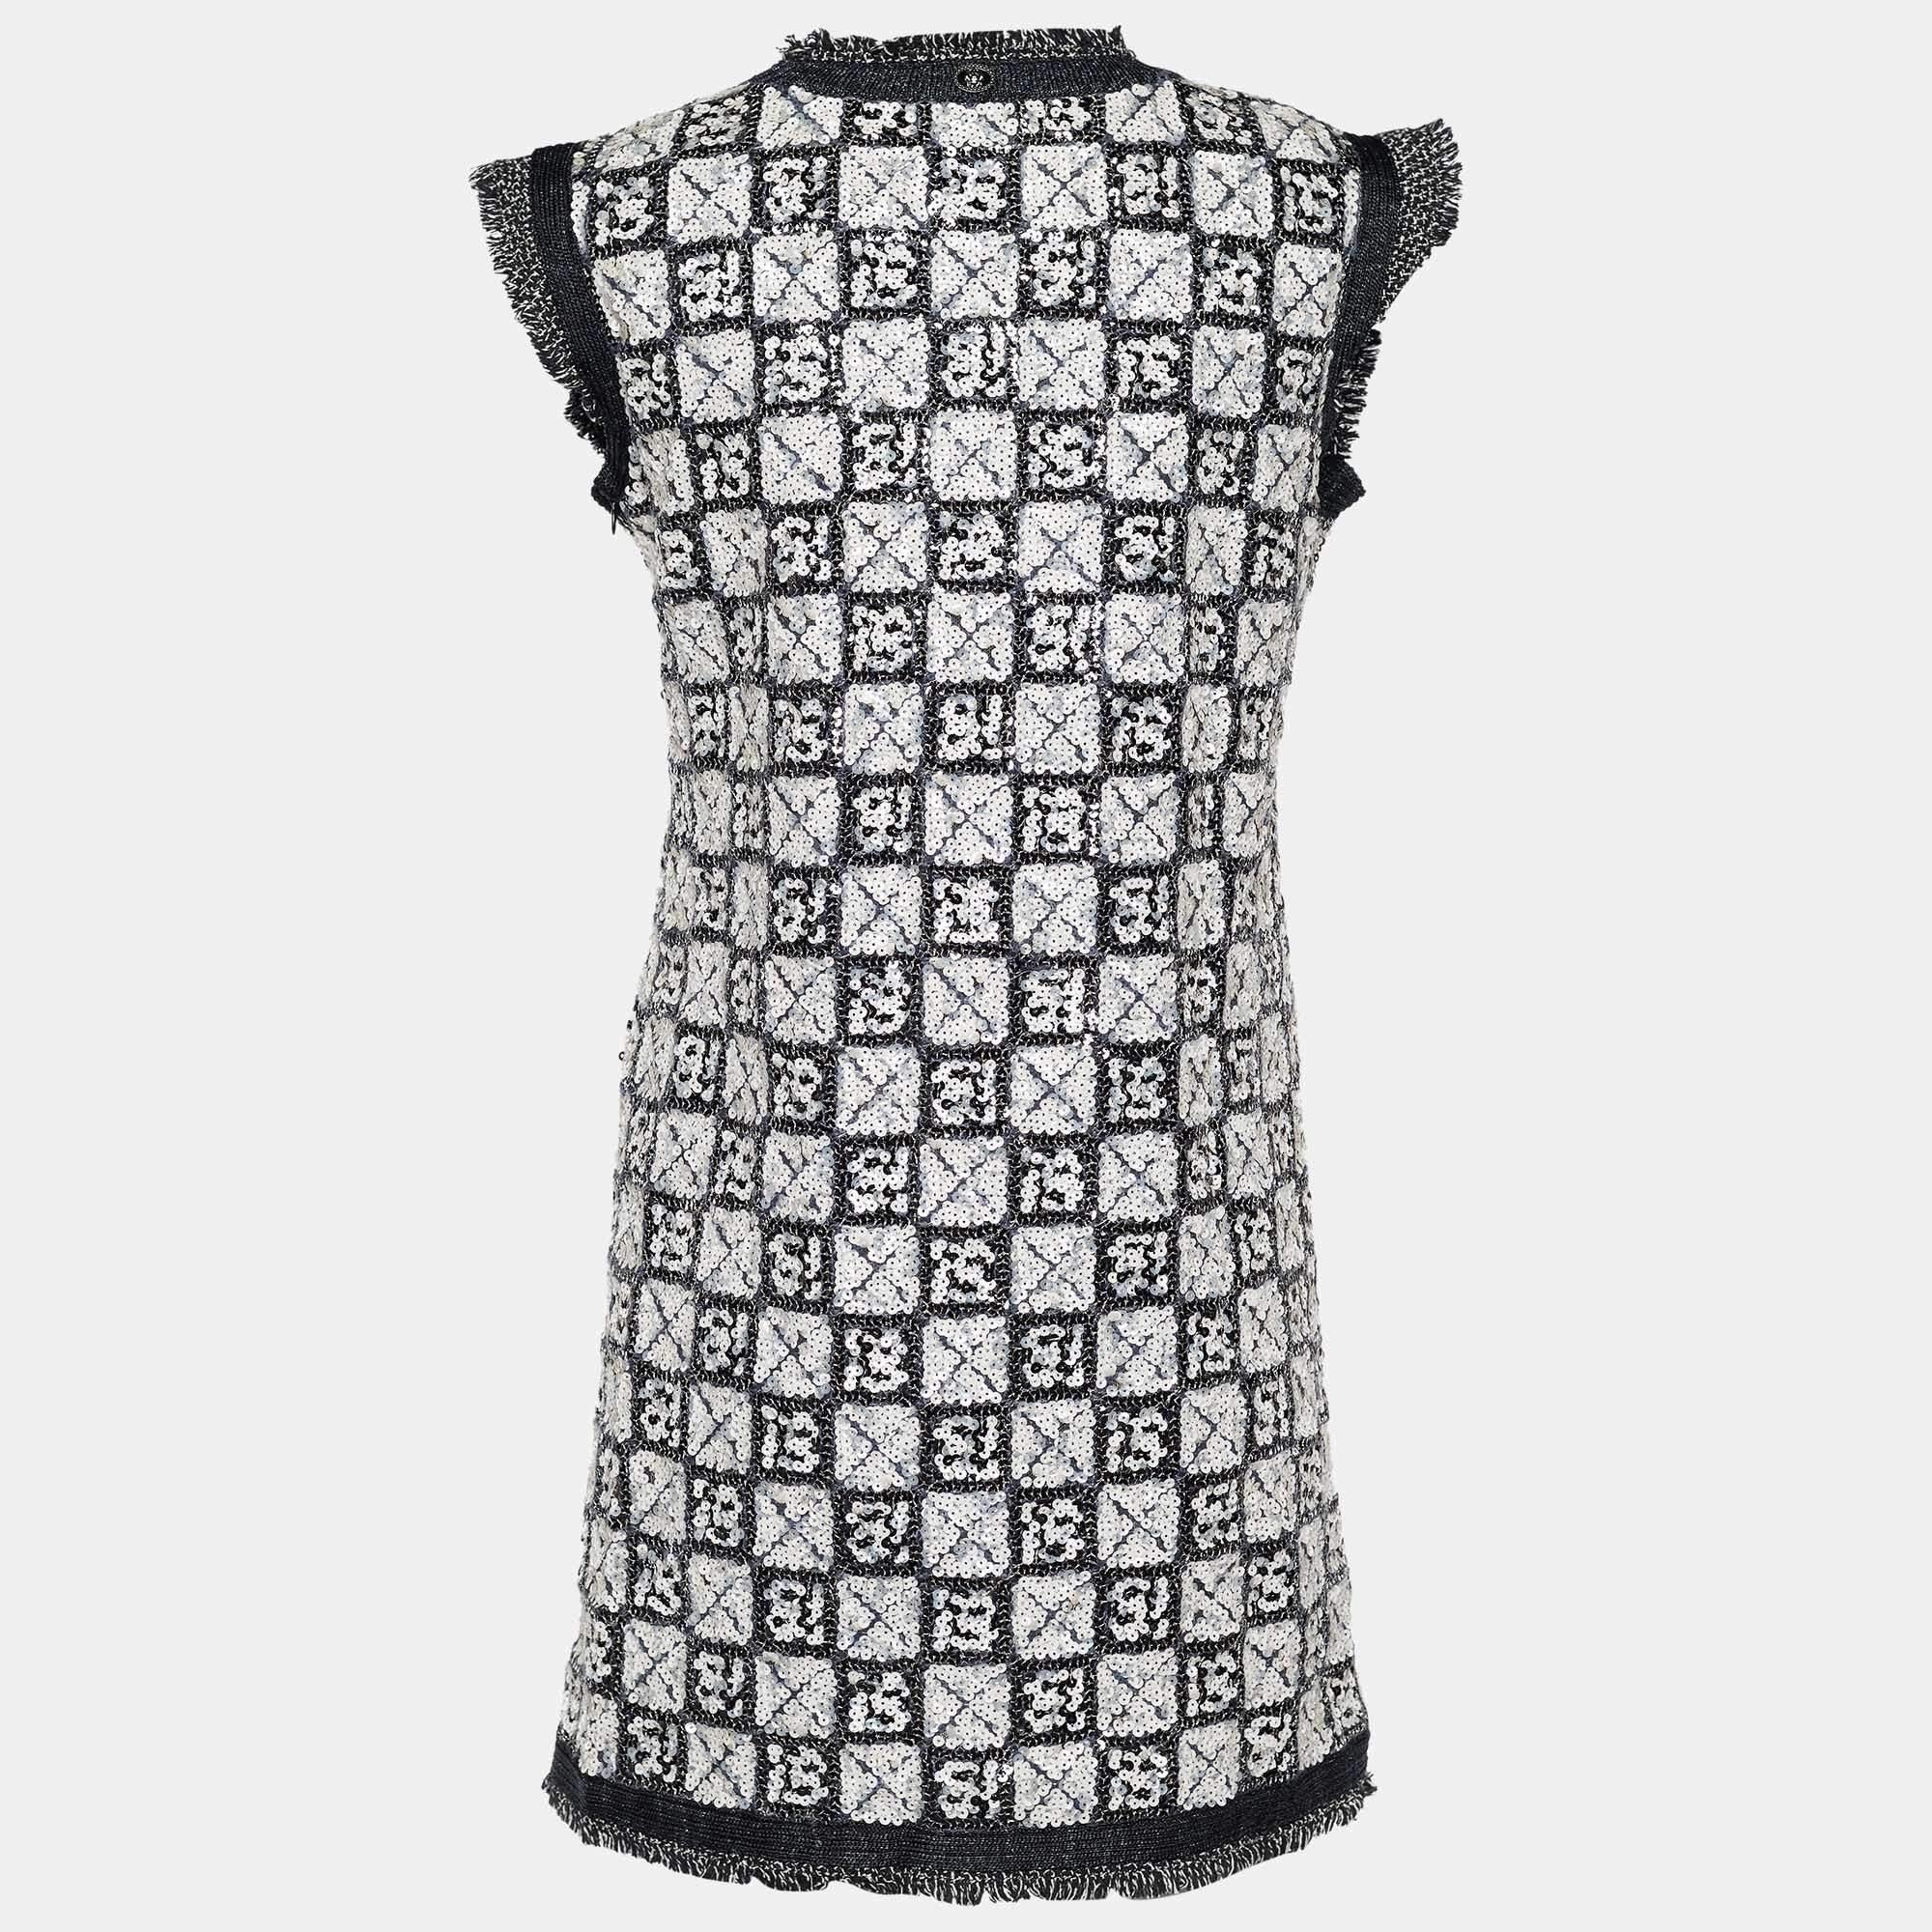 Get ready for the evening and look like a diva as you don this fabulous dress from the House of Chanel! Fashioned in sequin-embellished fabric, this mini dress is highlighted with a check pattern. It is provided with a zipper. Make a fascinating